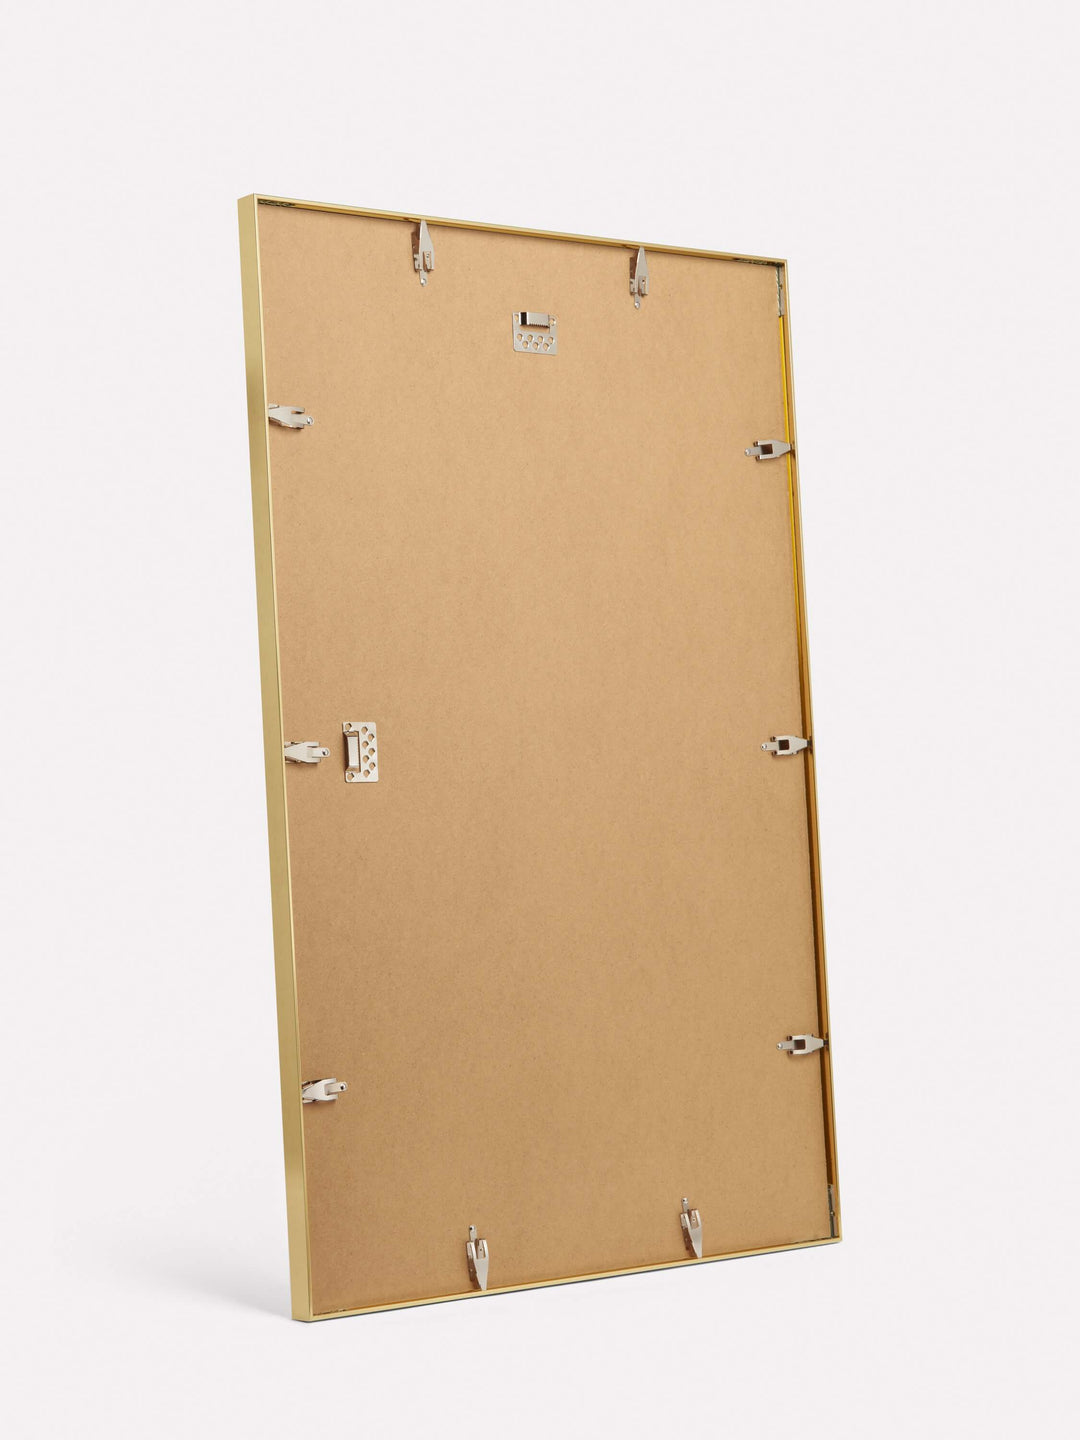 24x36-inch Thin Frame, Gold - Back view